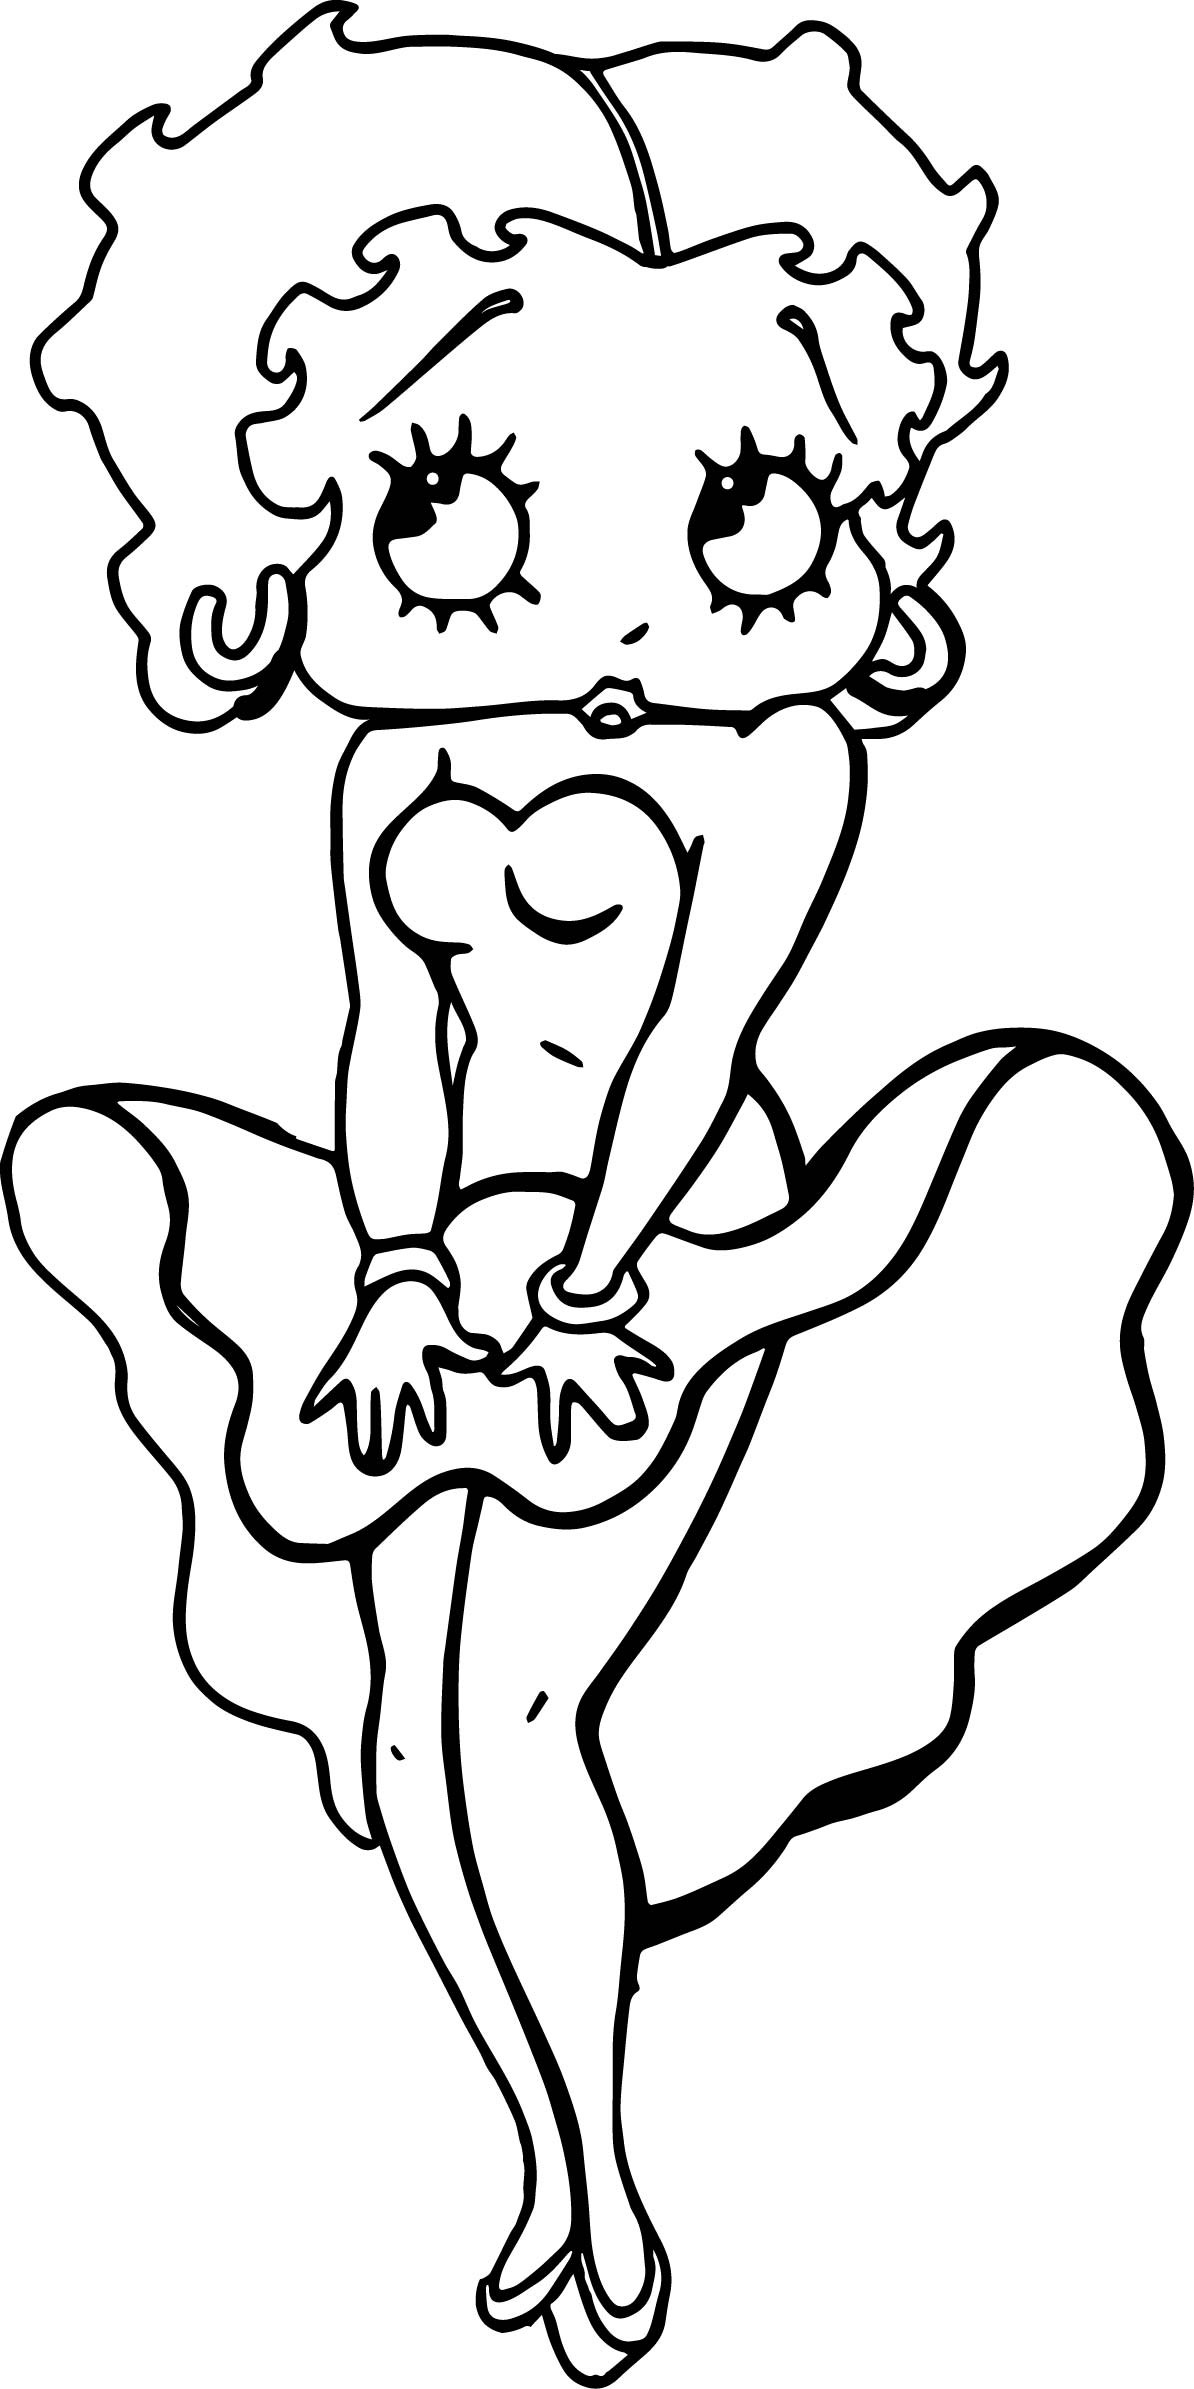 betty boop black and white drawing